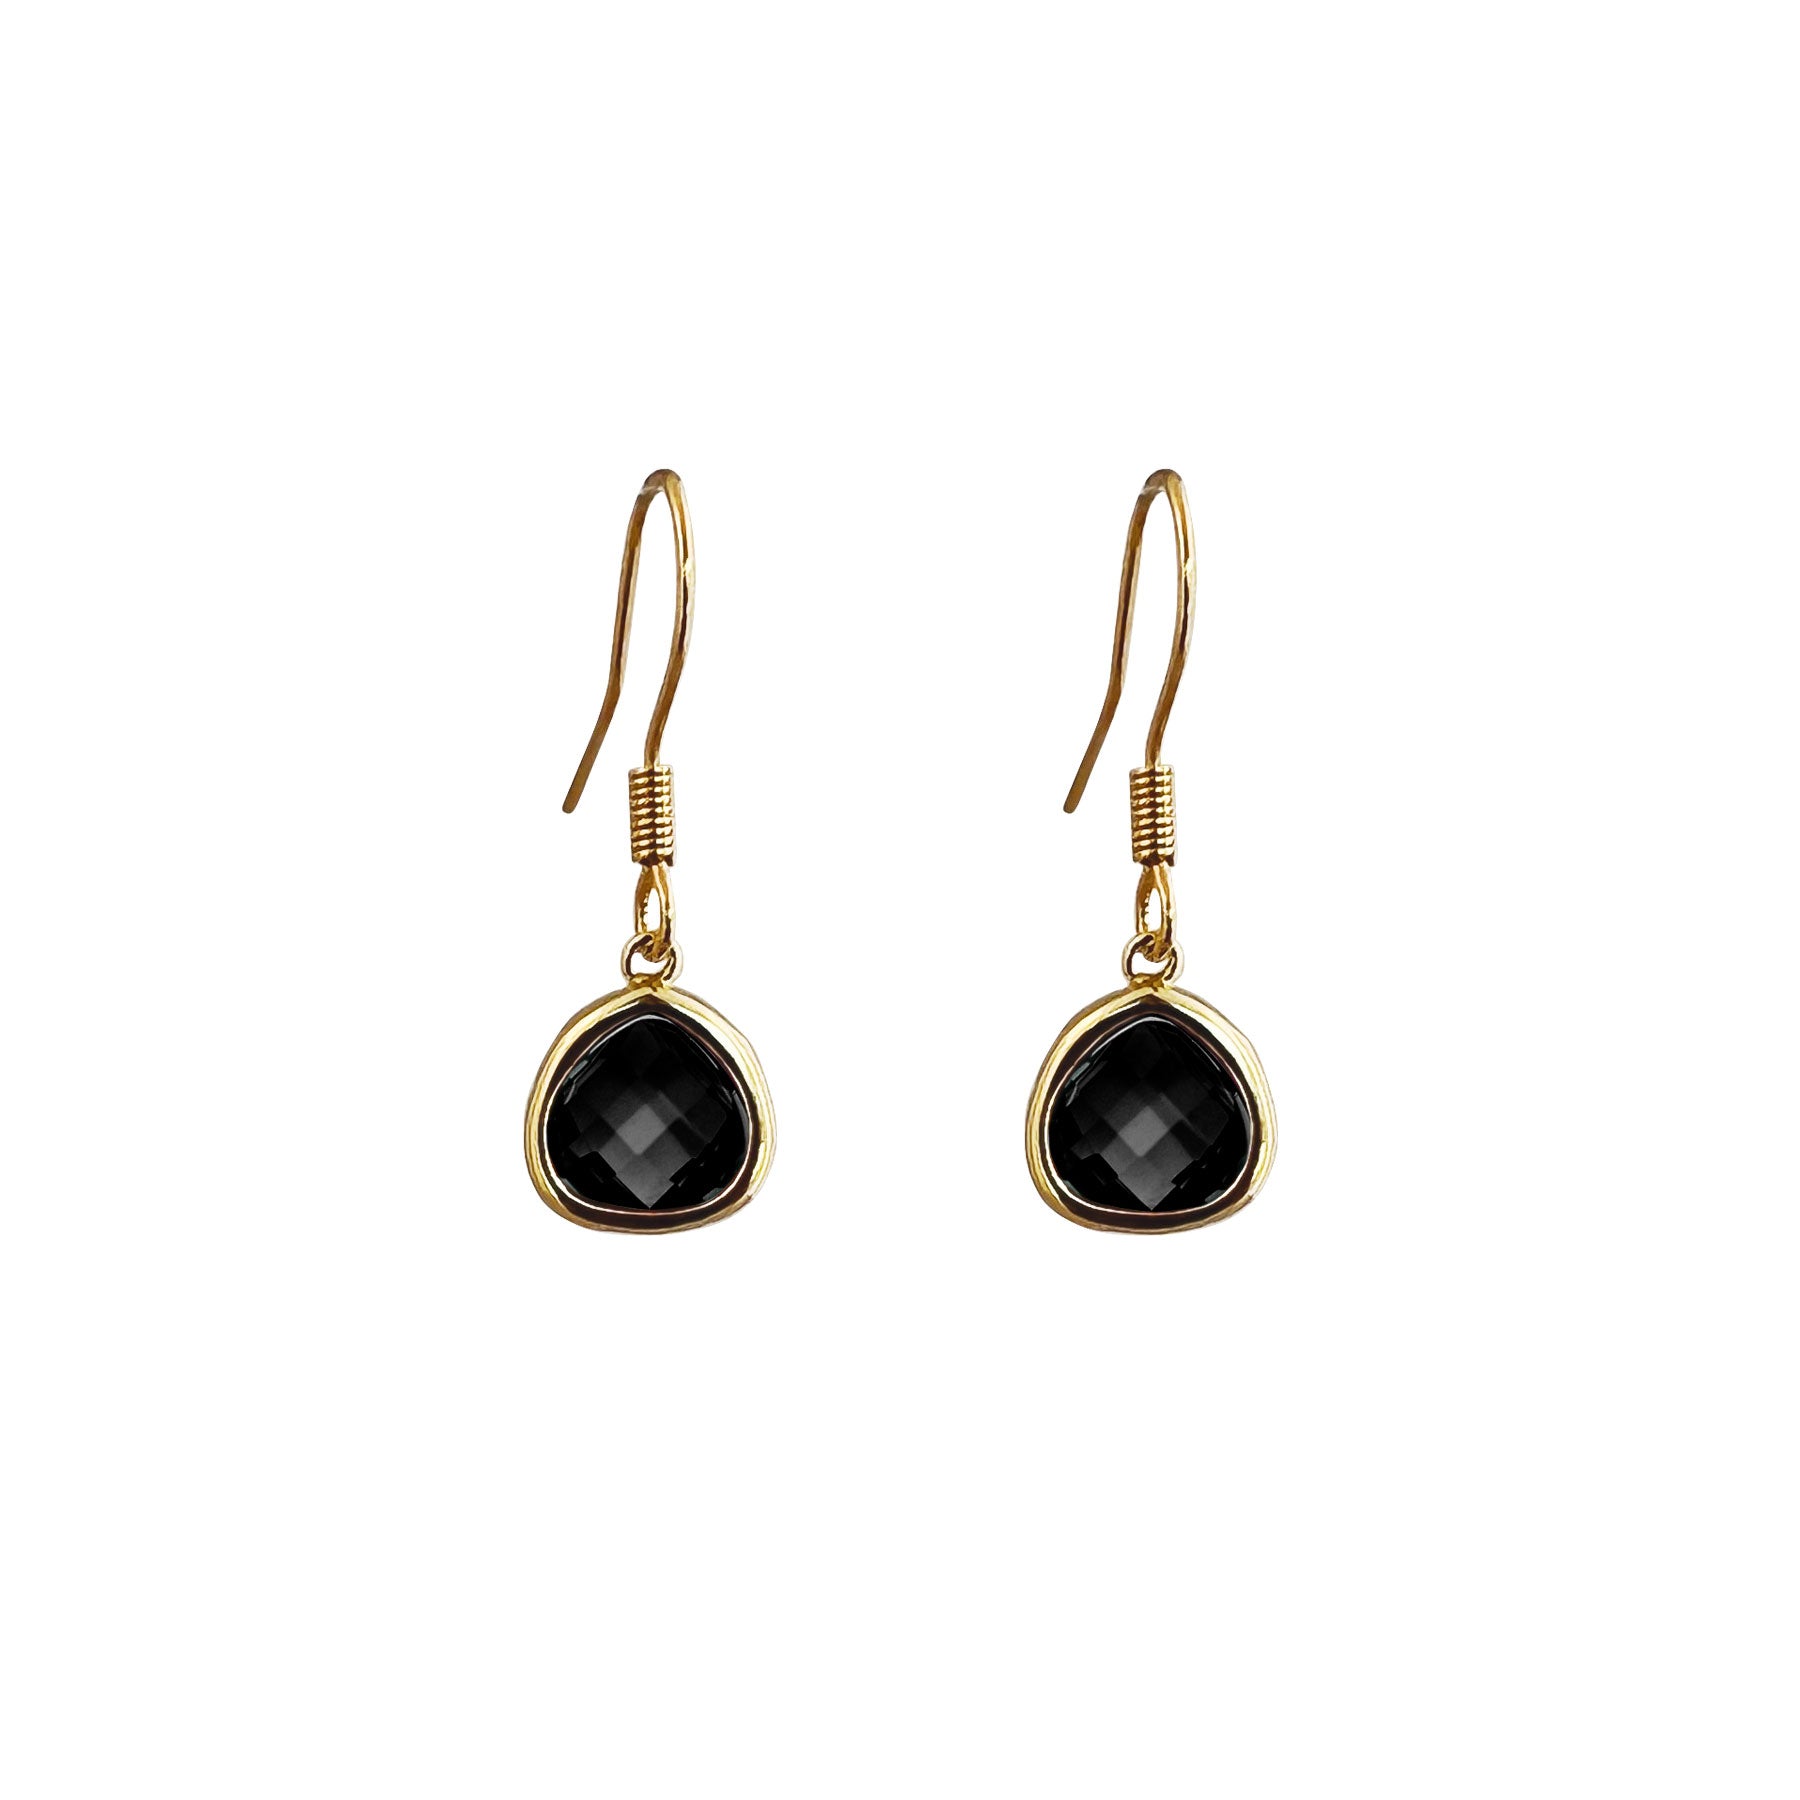 Gold pendant earrings with black crystal drops 